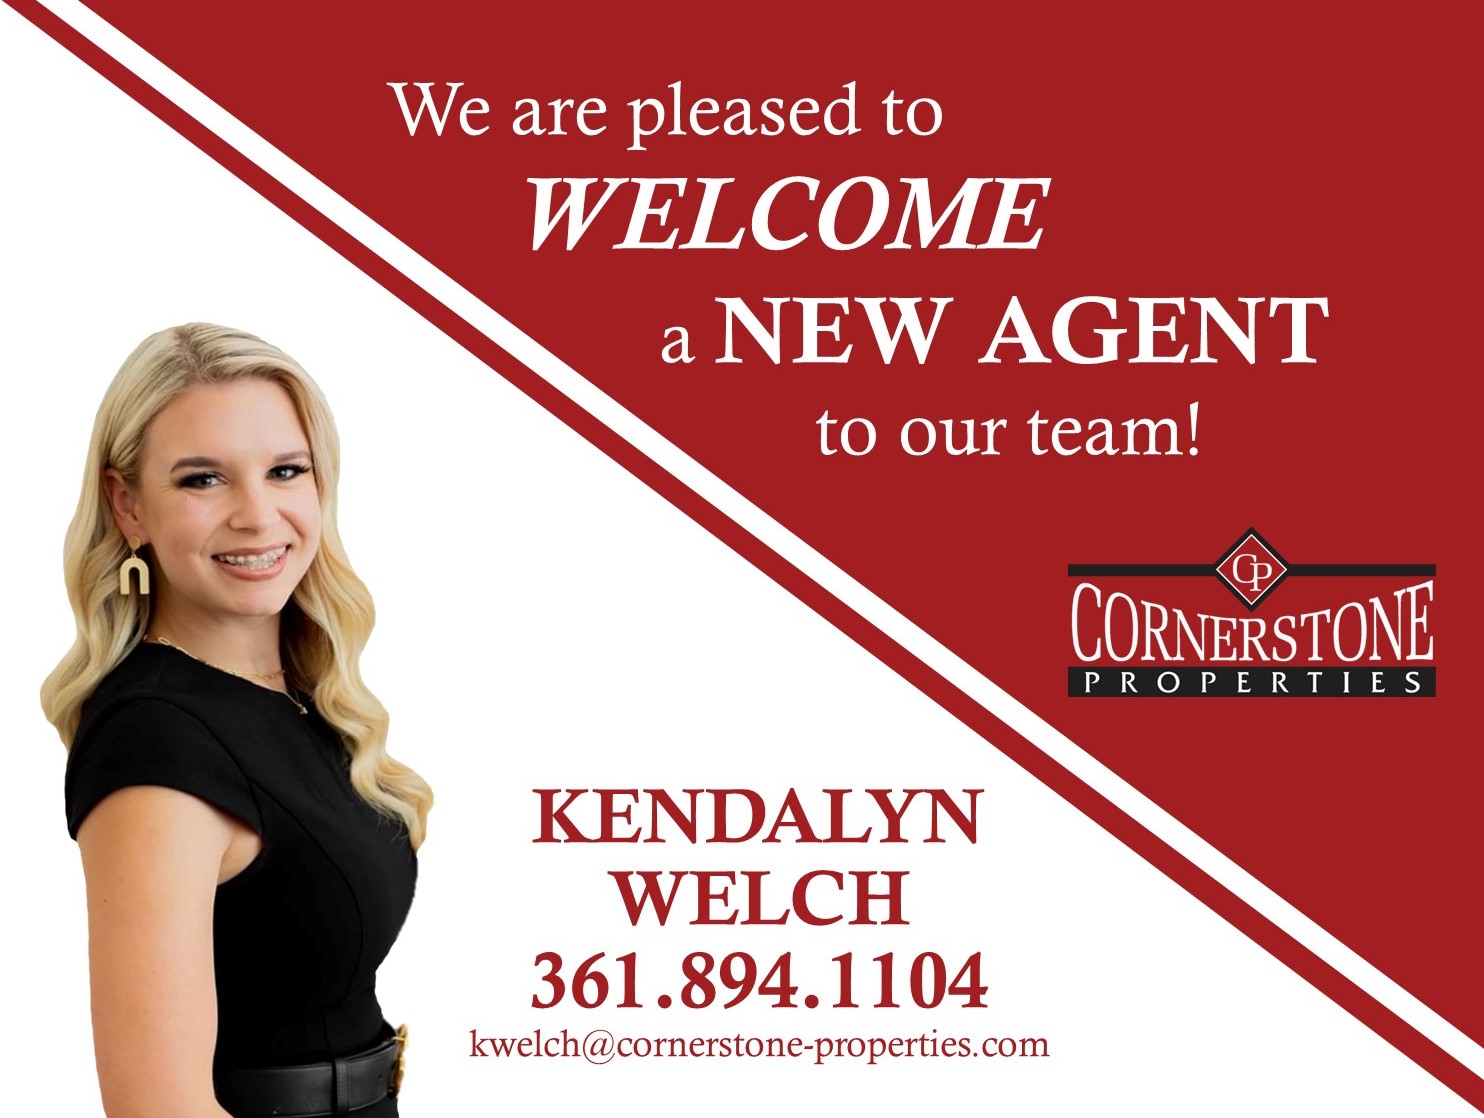 WELCOME KENDALYN TO THE CORNERSTONE TEAM!